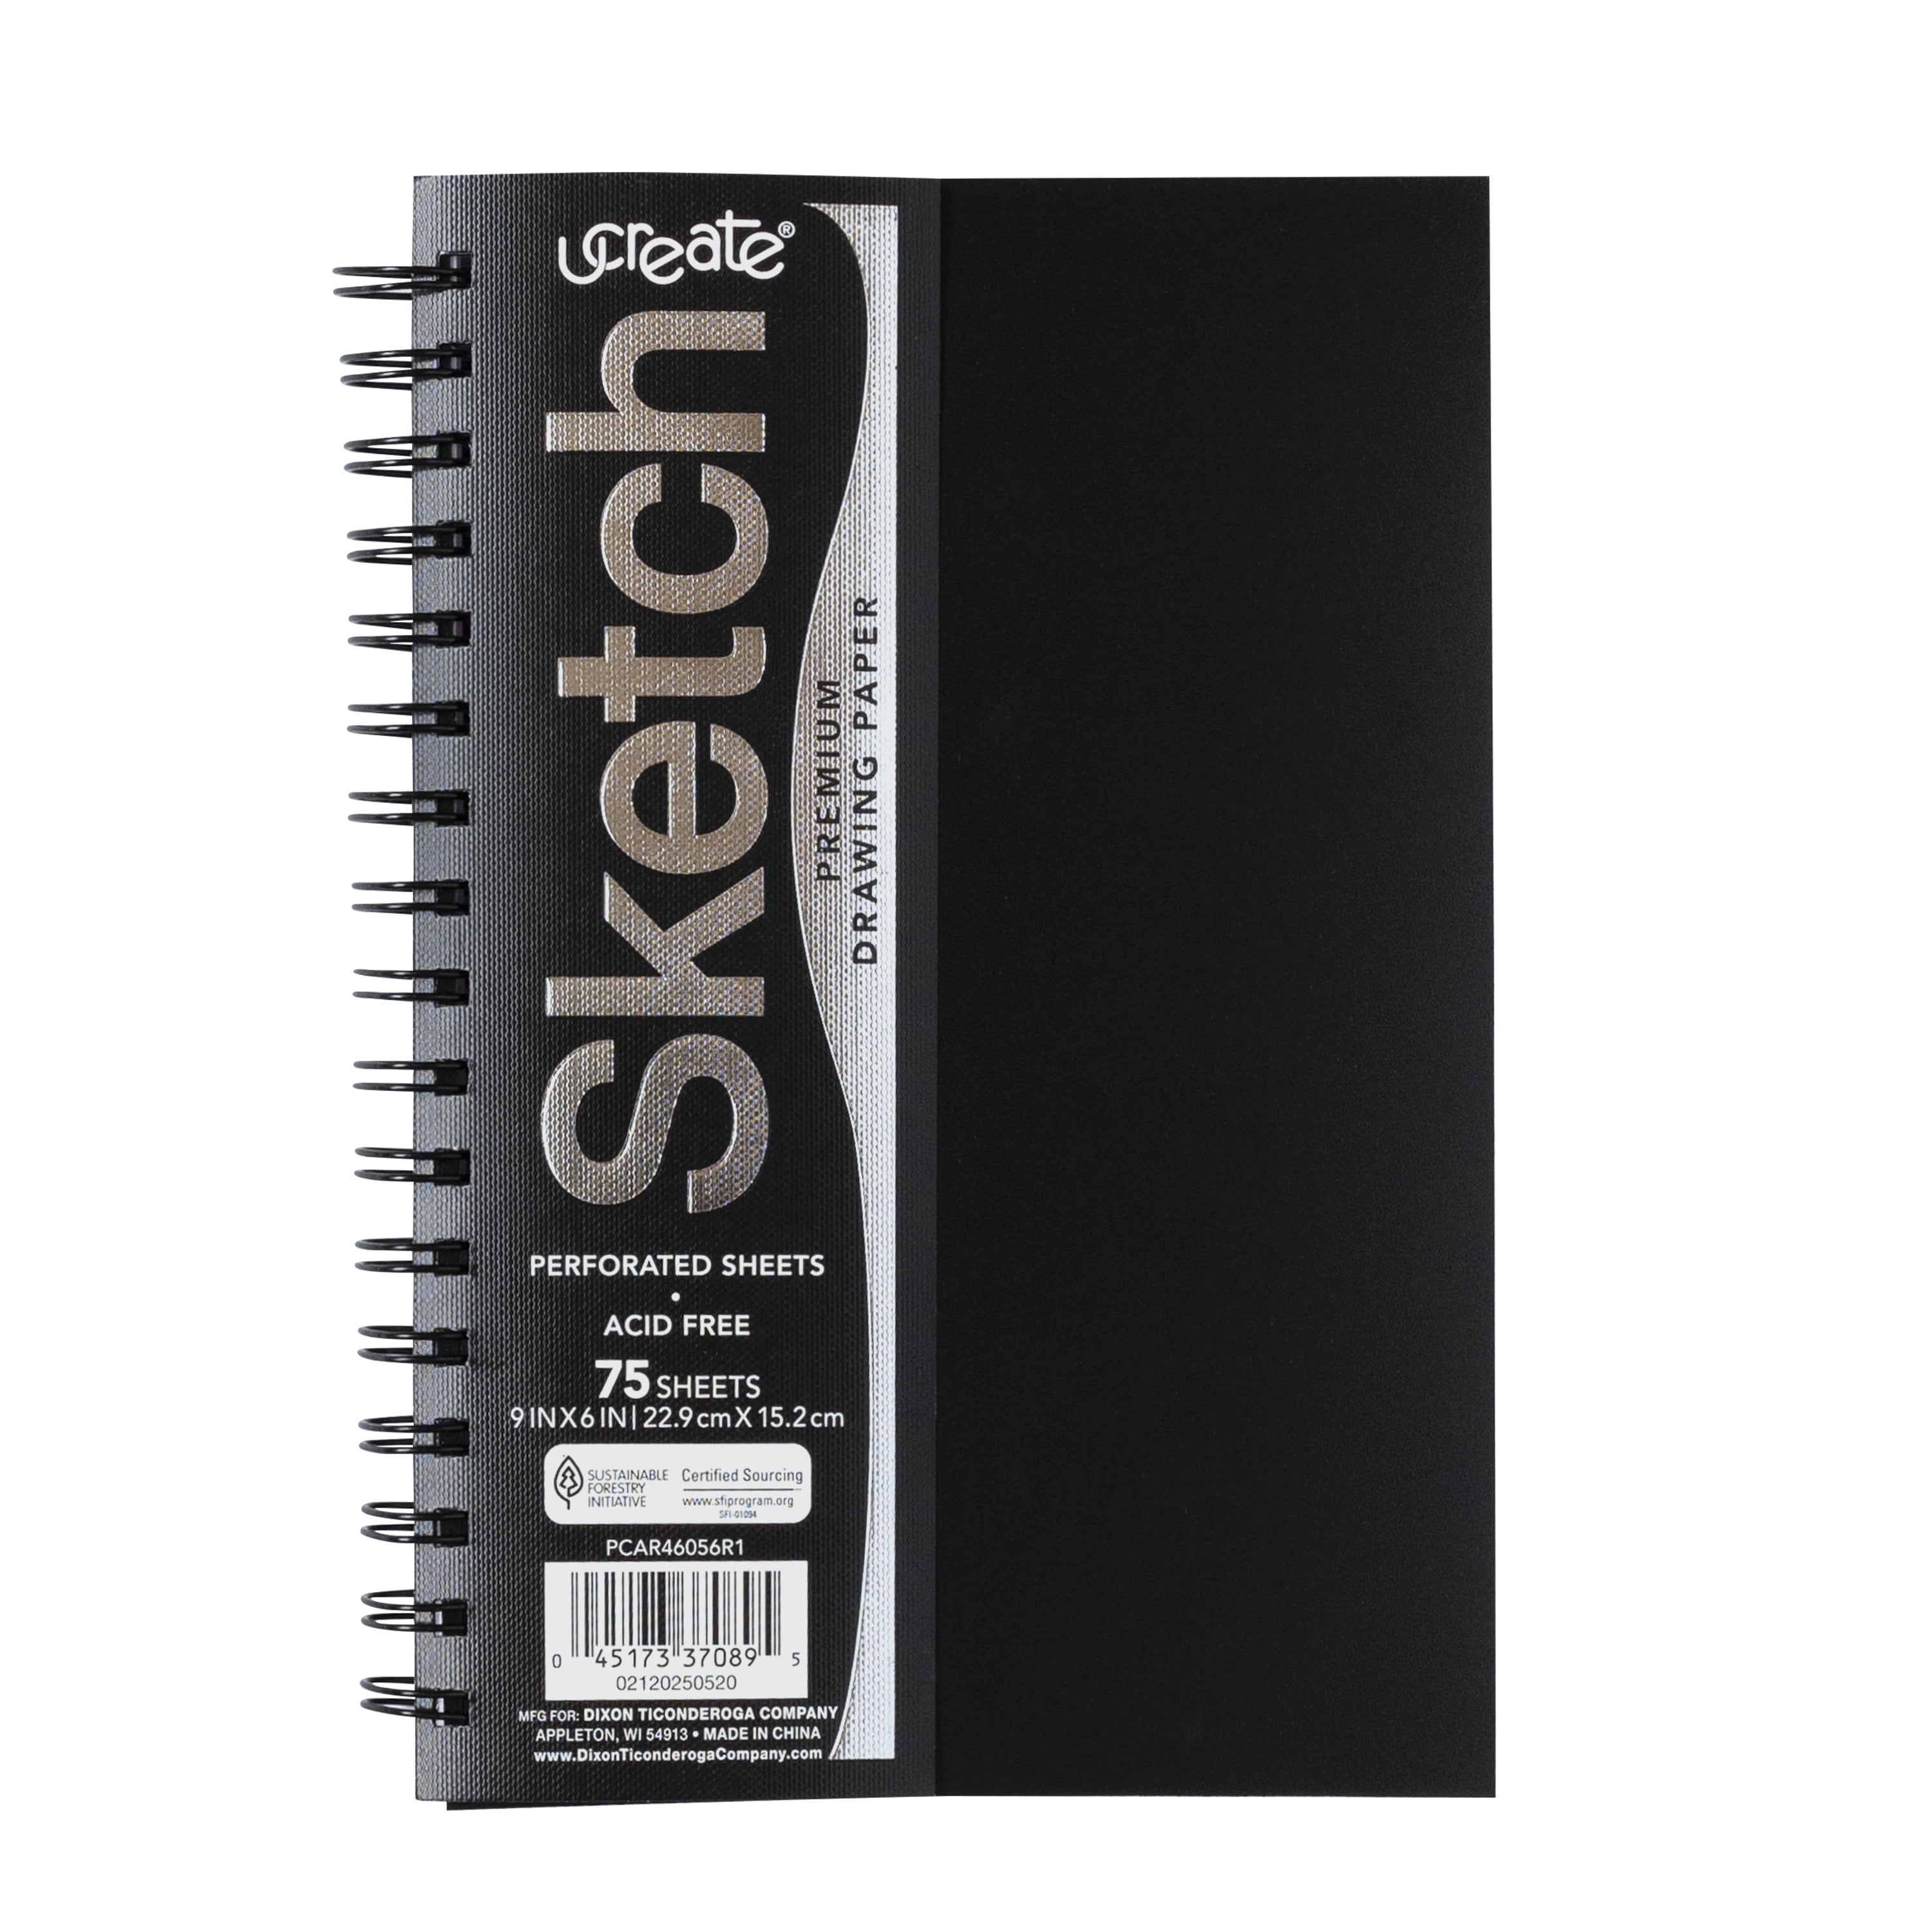 UCreate Poly Cover Sketch Book, Heavyweight, 6 in x 9 in, Black, 75 Sheets